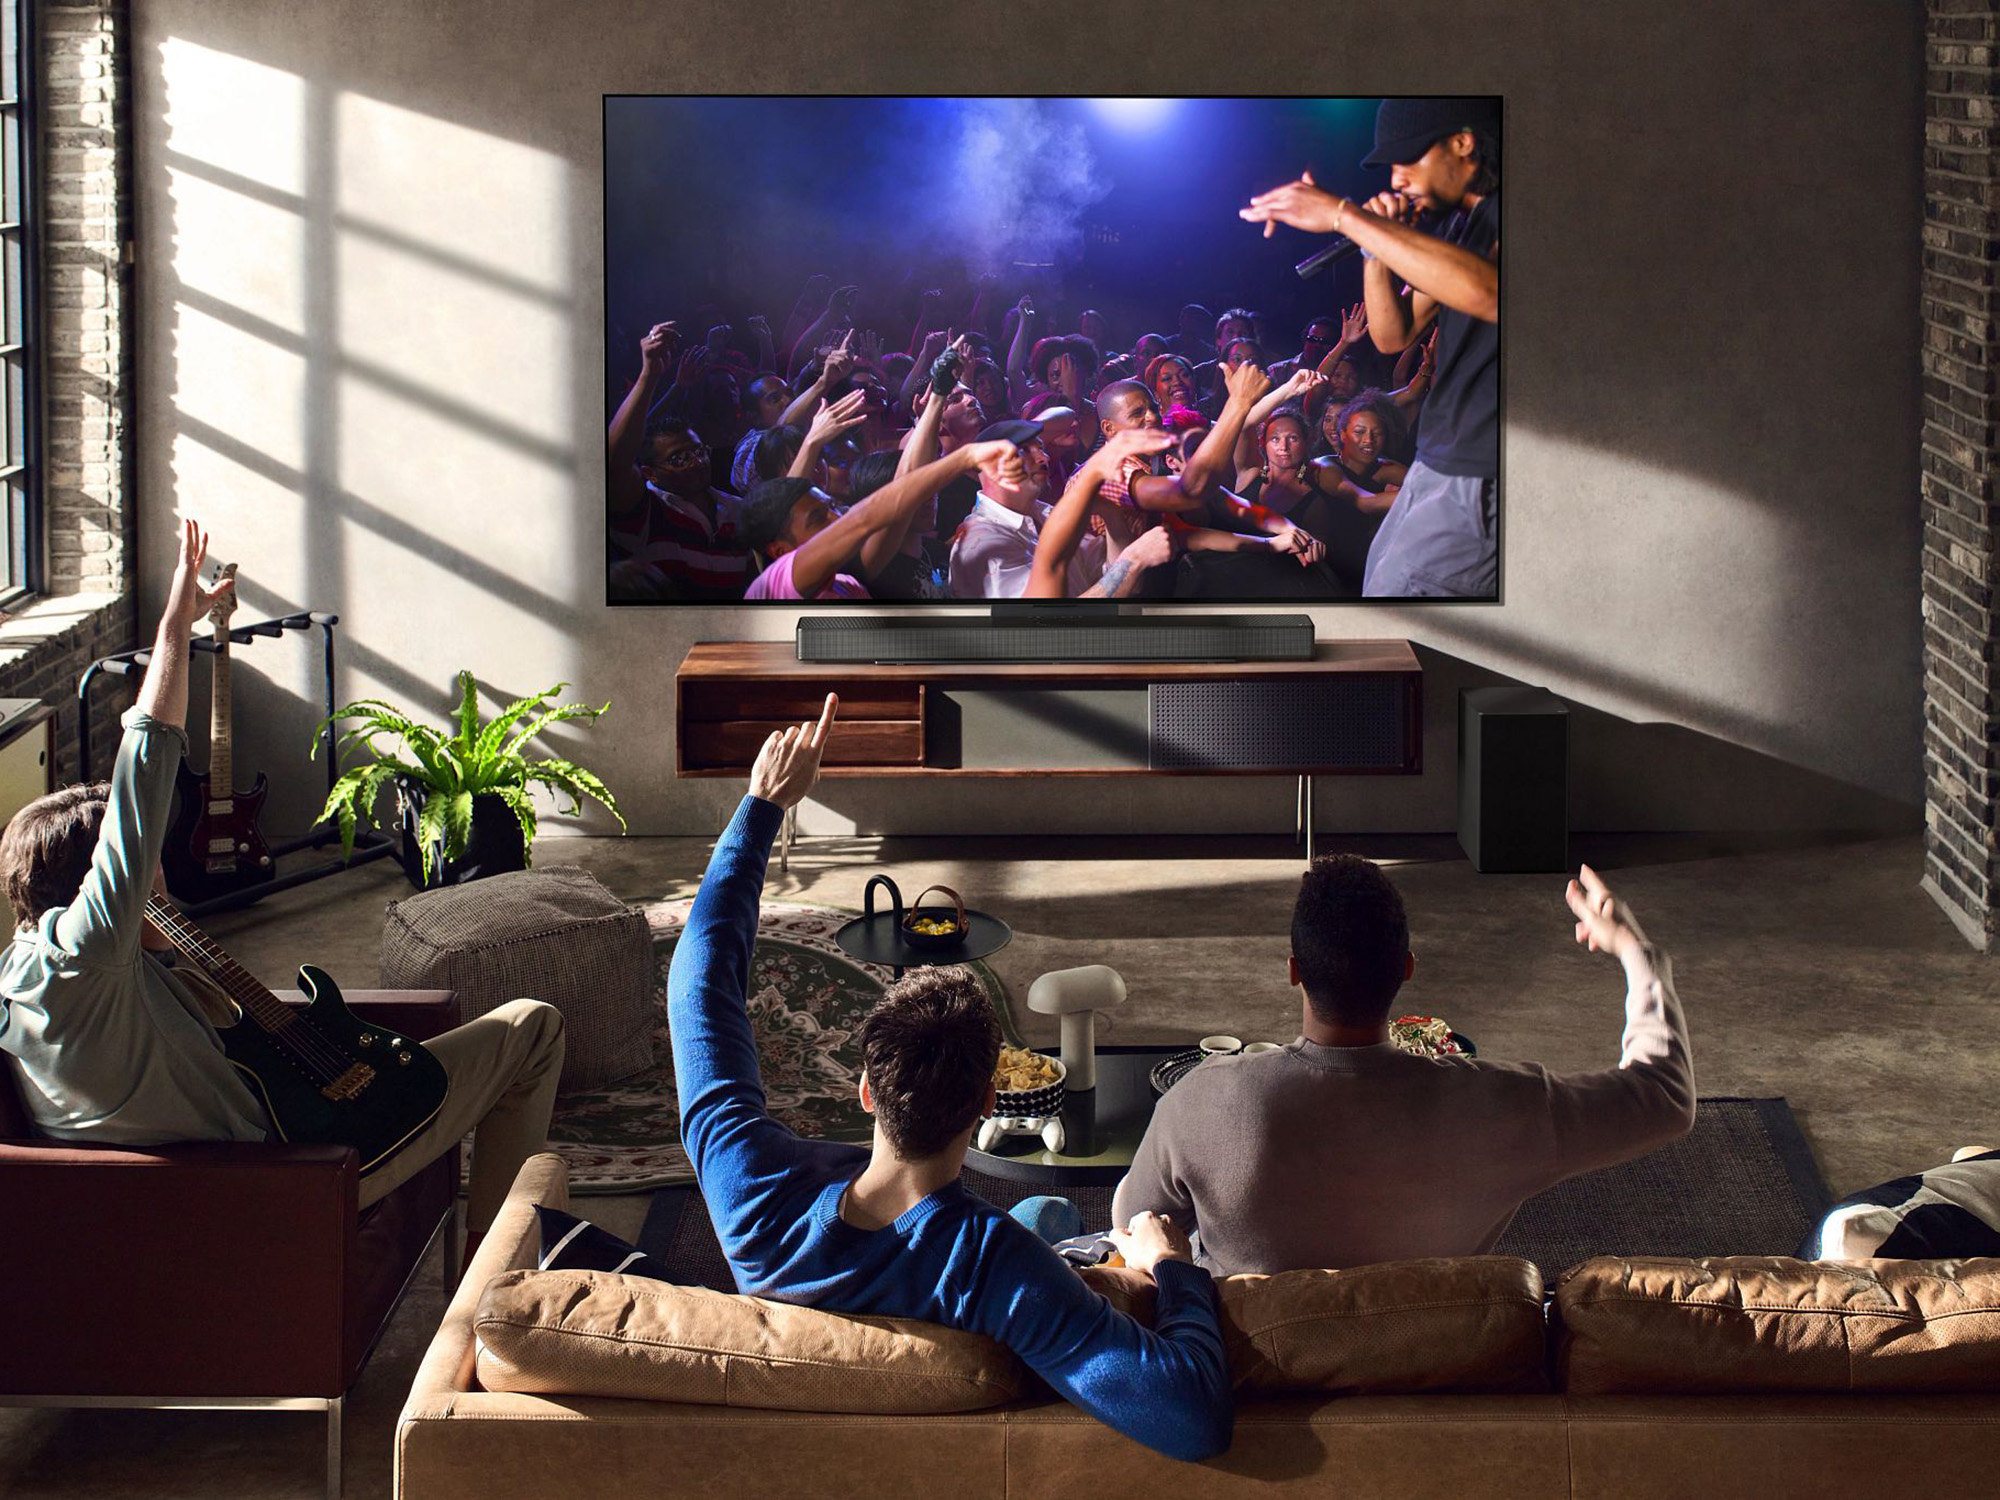 LG's SC9 and soundbars are now available | Digital Trends